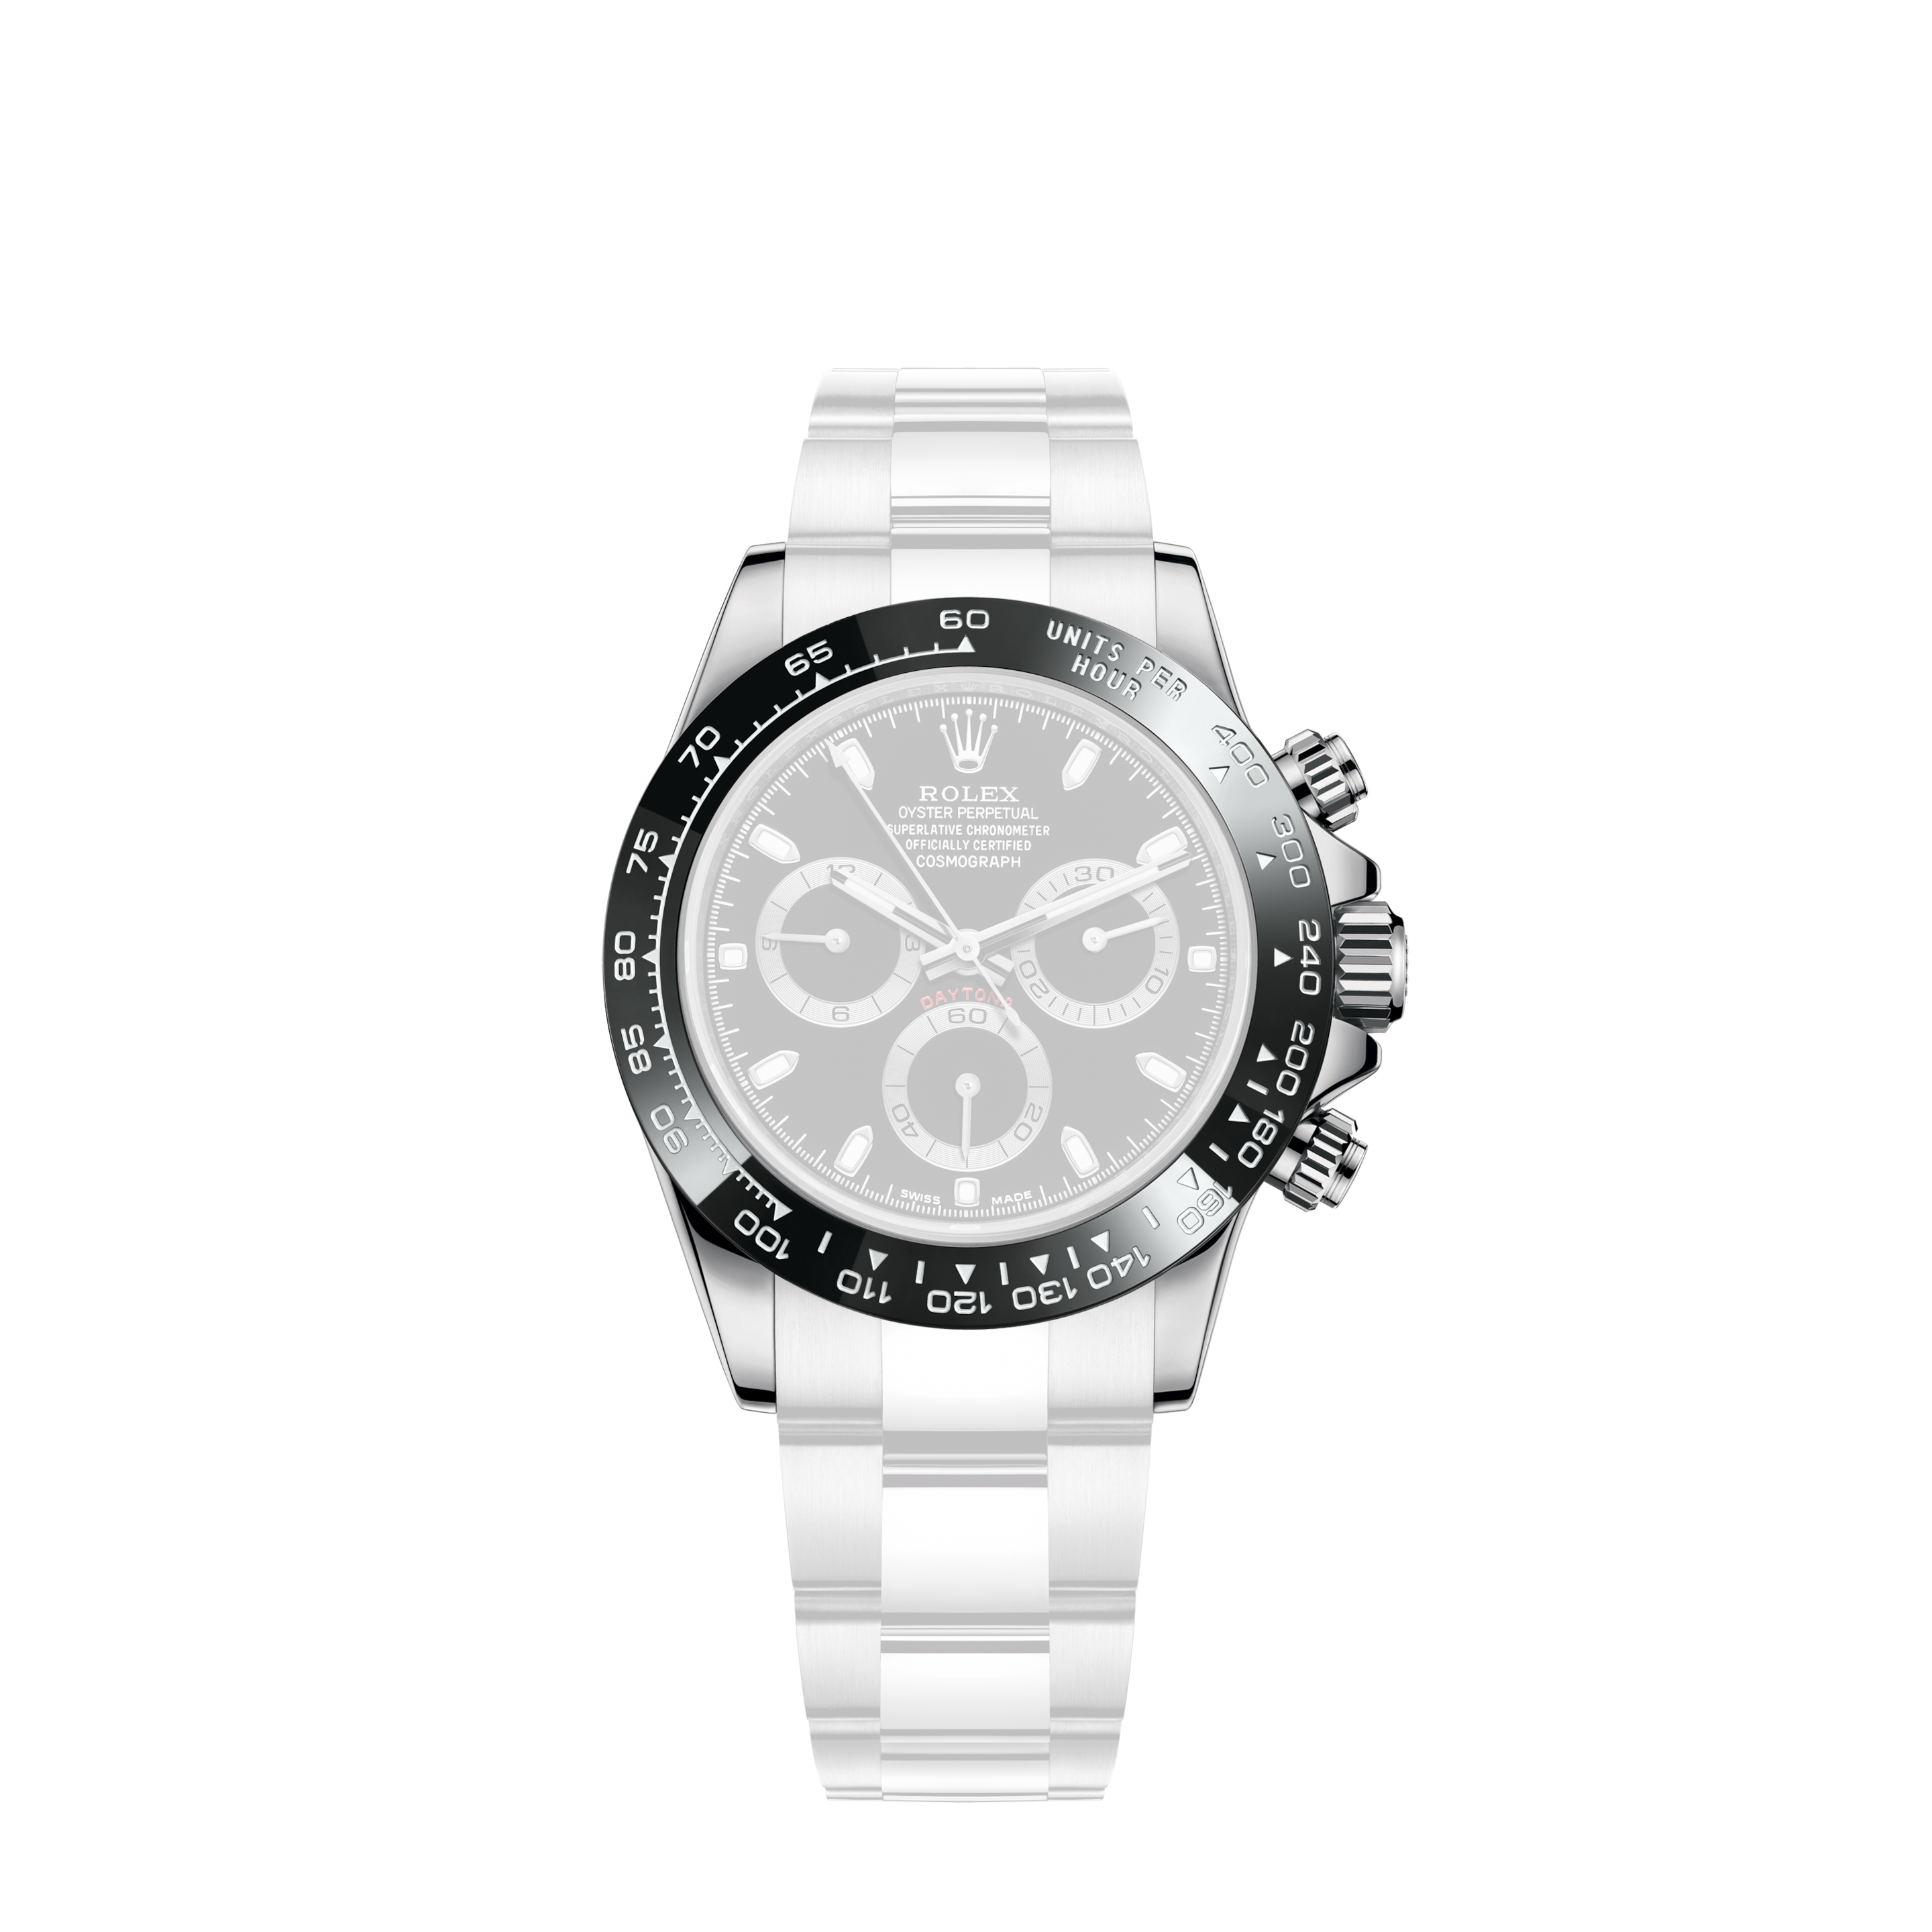 Rolex Day-Date 40 228235 Chocolate Baguette Dial New 2021Rolex Submariner 16610 Black Dial Stainless Steel 2007